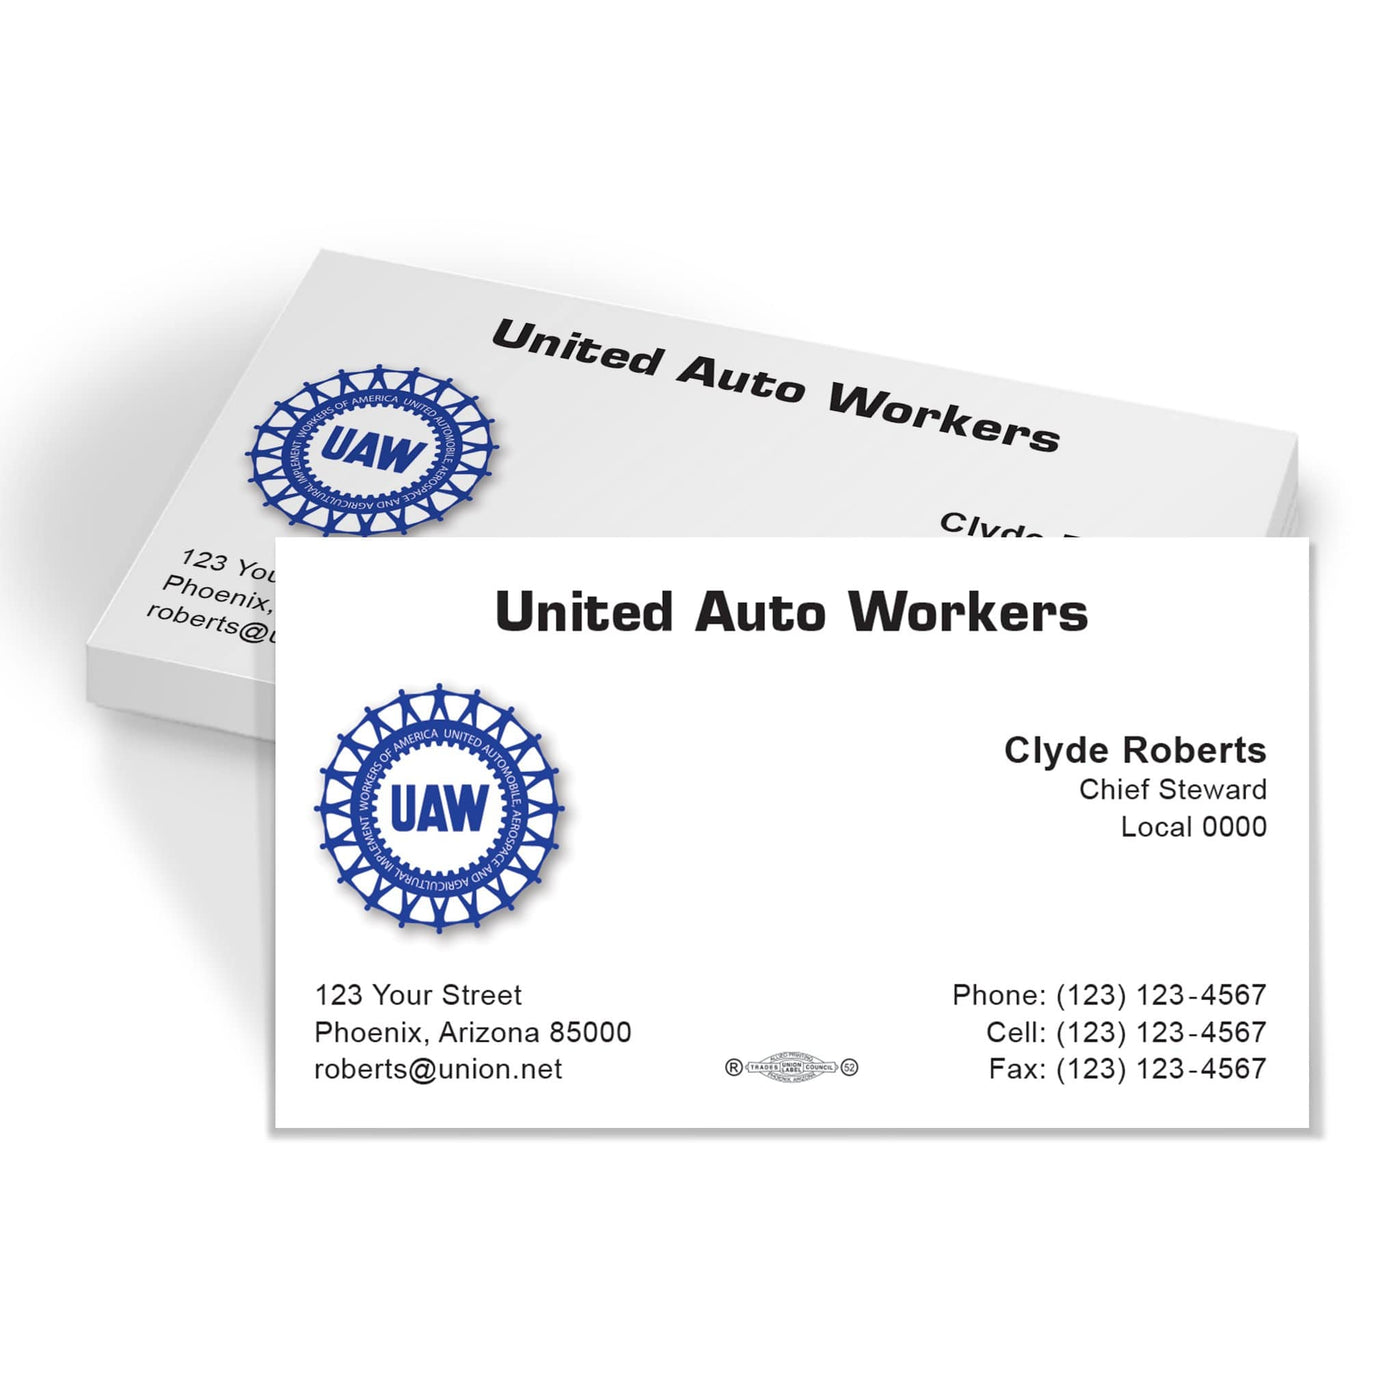 UAW-United-Auto-Workers Union Printed Business Cards 